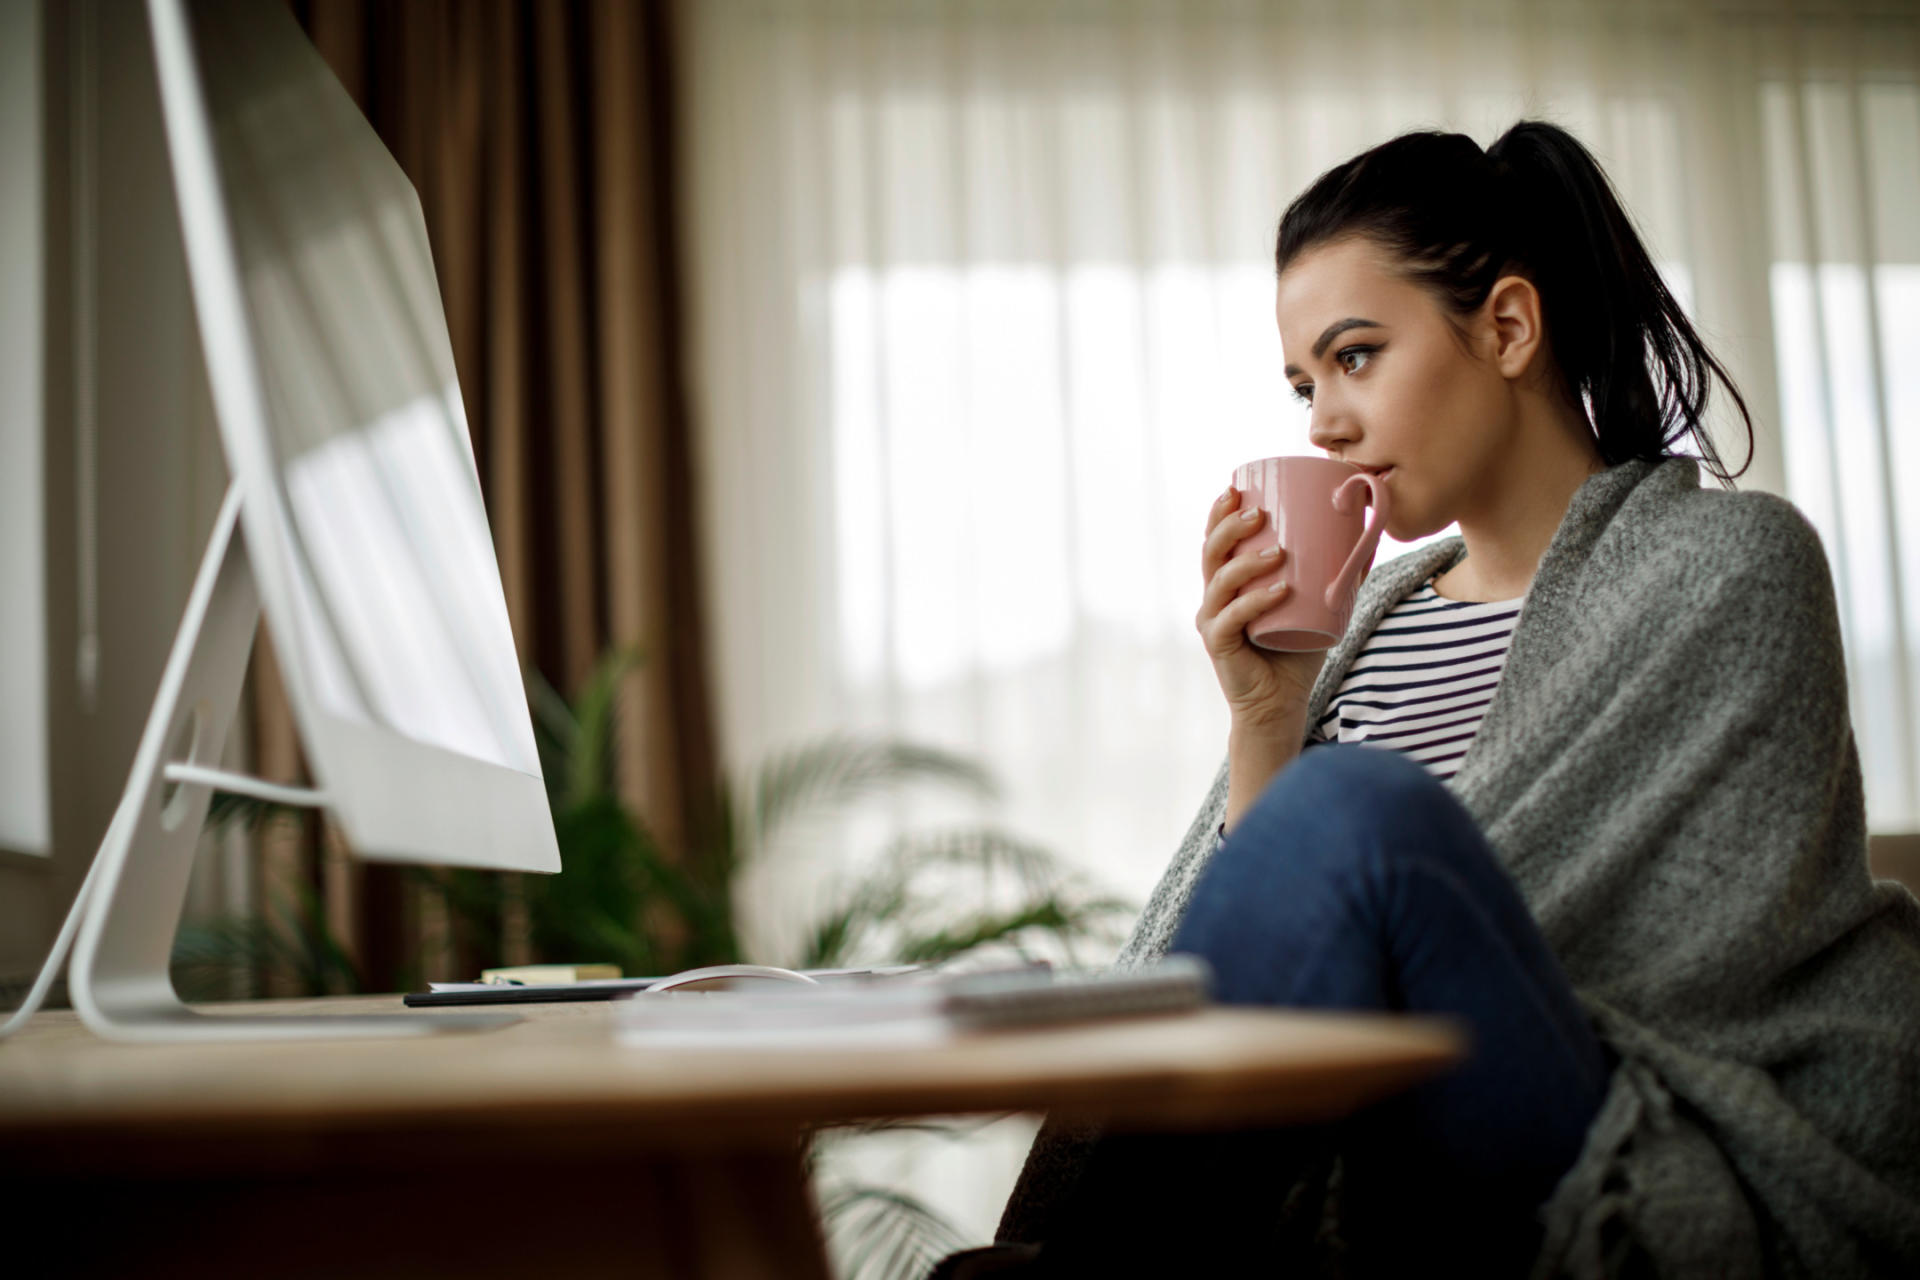 A woman sits in front of the computer with a cup of tea, wrapped in a blanket